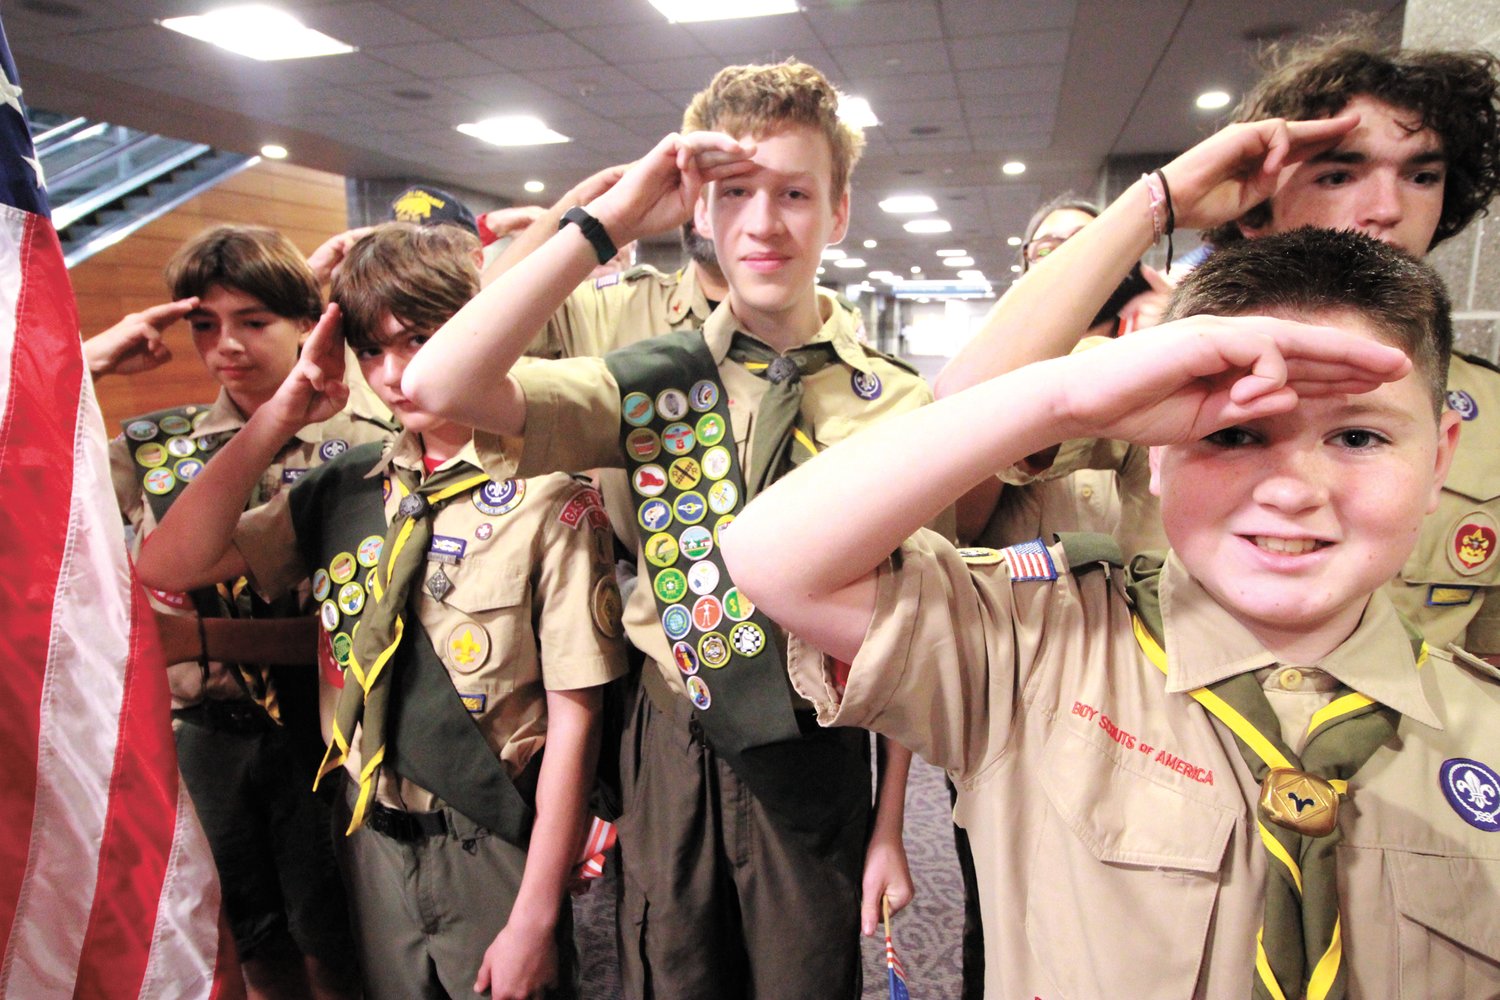 SALUTING THEIR SERVICE: Members of Boy Scout Troop 4 Gaspee were up as early as 4 a.m. Saturday in preparation of greeting members of Honor Flight Thunderbolt veterans as they arrived at Green Airport for their flight to Baltimore and day in the Nation’s Capital. (Warwick Beacon photos)